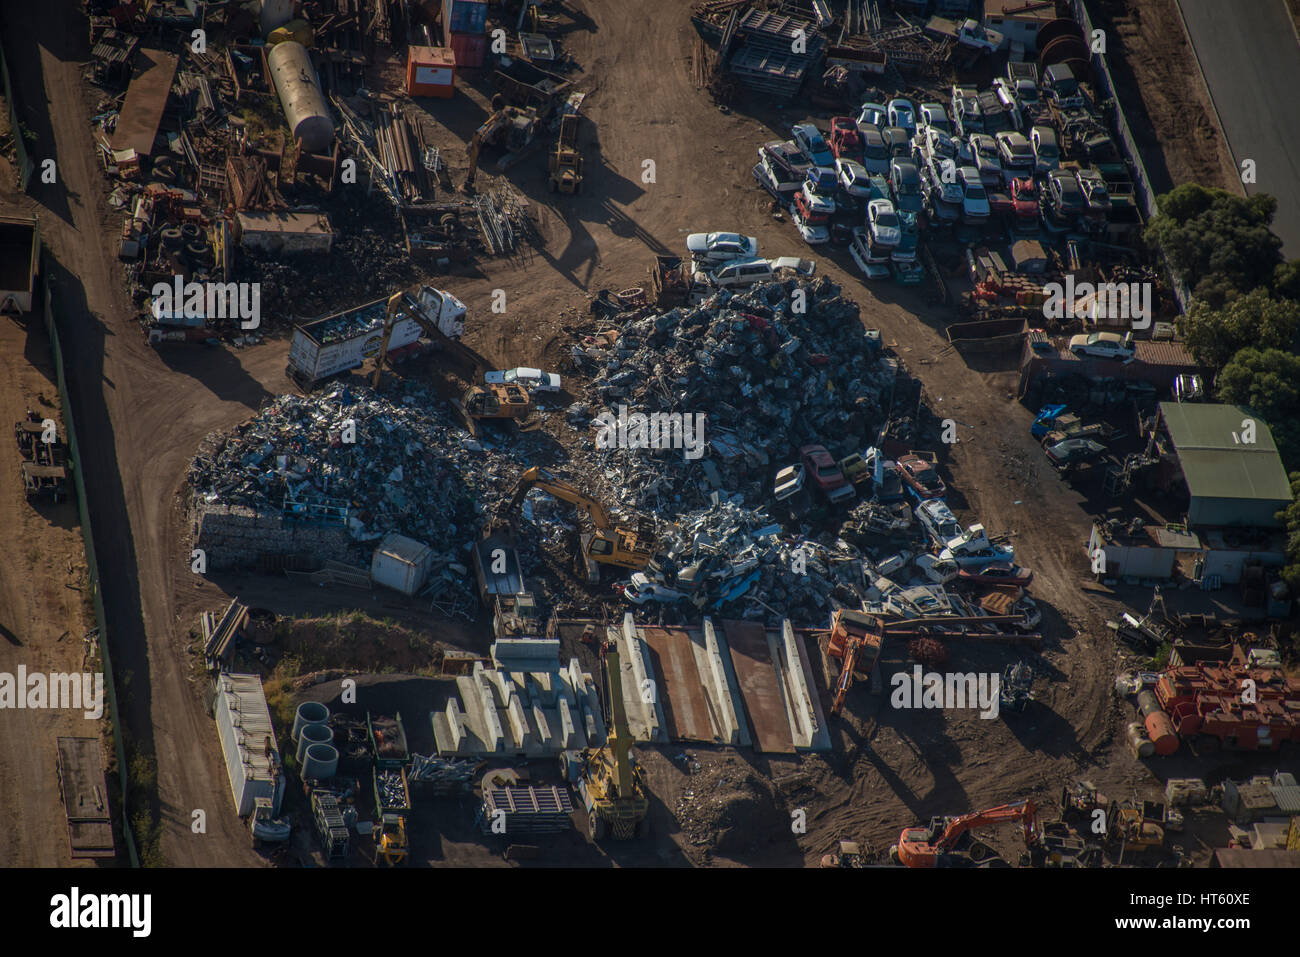 An aerial view of a car wrecking yard, with cubes of crushed vehicles. Stock Photo